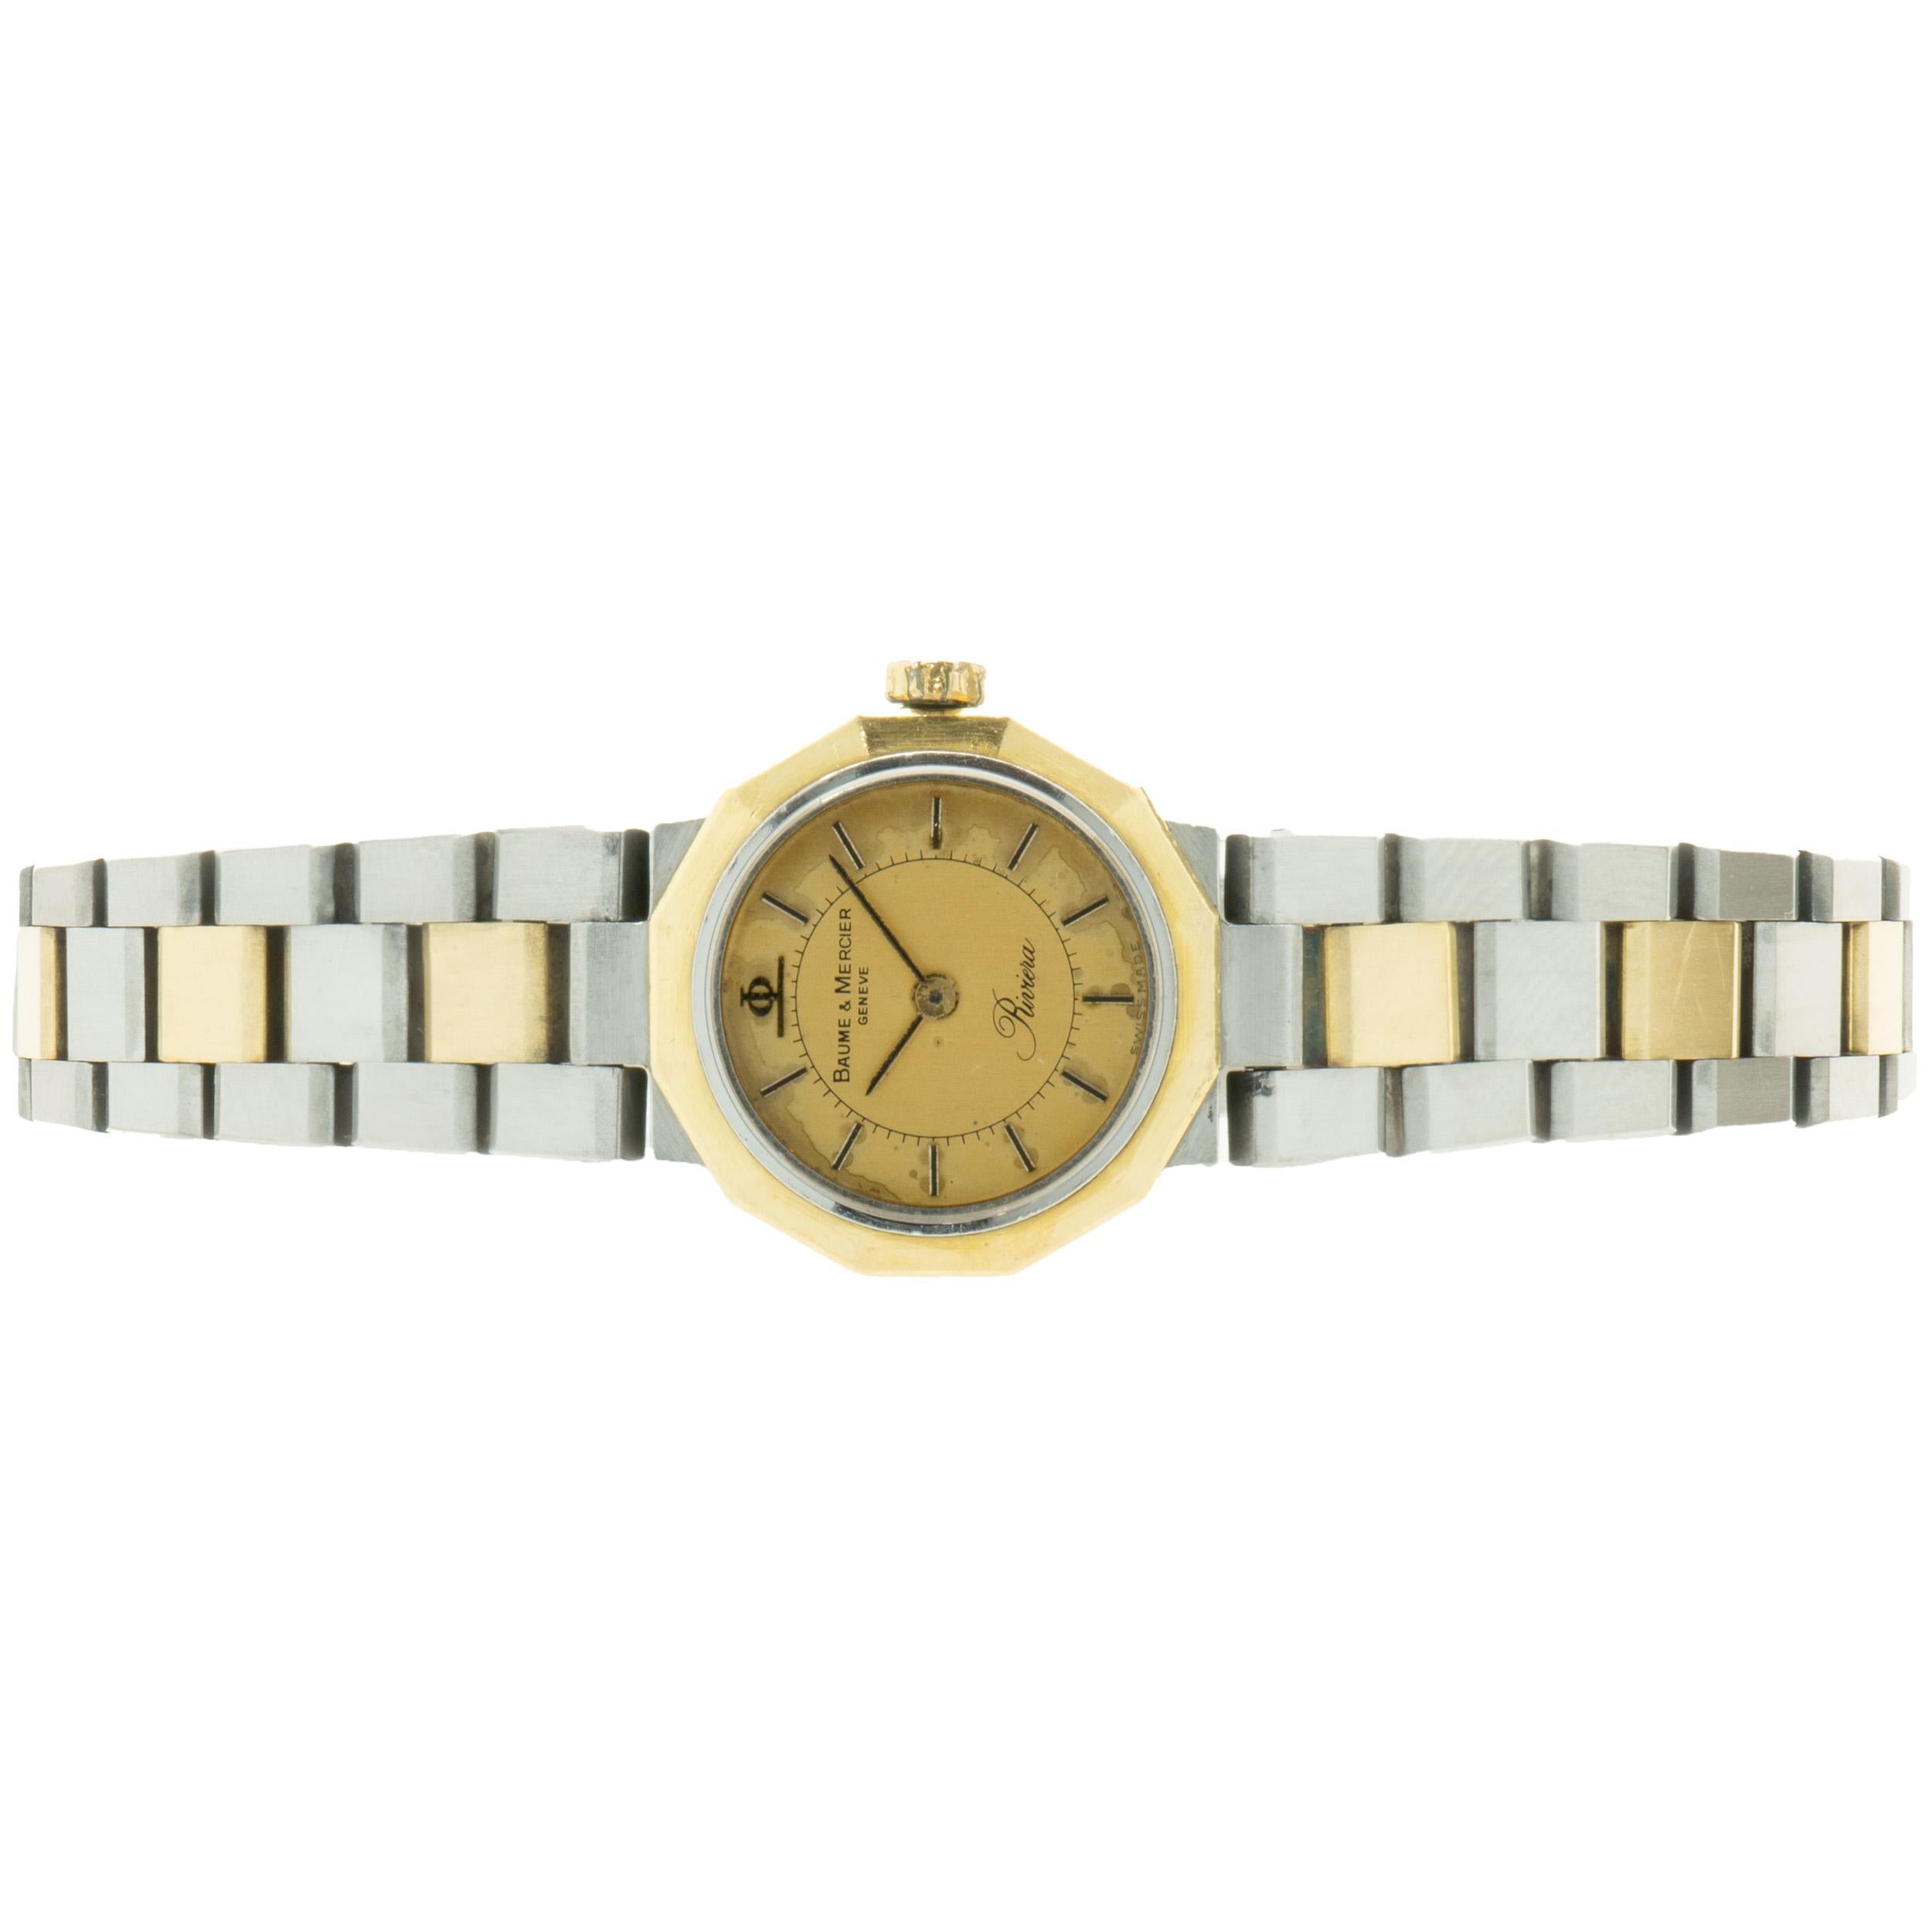 Movement: quartz
Function: hours, minutes
Case: 22mm octagonal case, push/pull crown, sapphire crystal
Band: 18K yellow gold/stainless steel bracelet, integrated clasp
Dial: champagne stick
Serial # 1419XXX
Reference: 5220.038

No box or papers